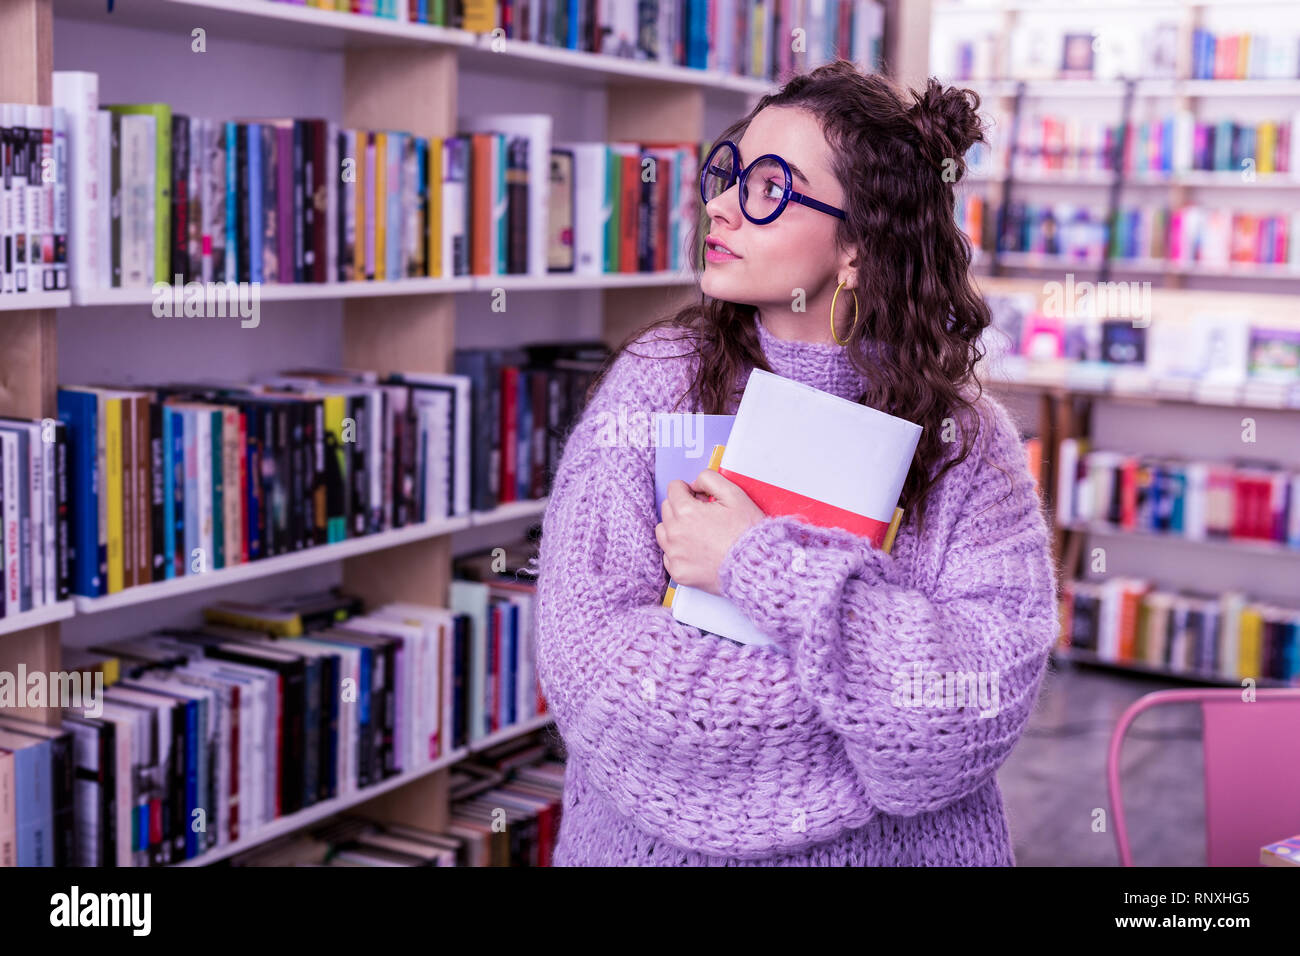 Long-haired appealing girl in oversize sweater carrying bunch of books Stock Photo